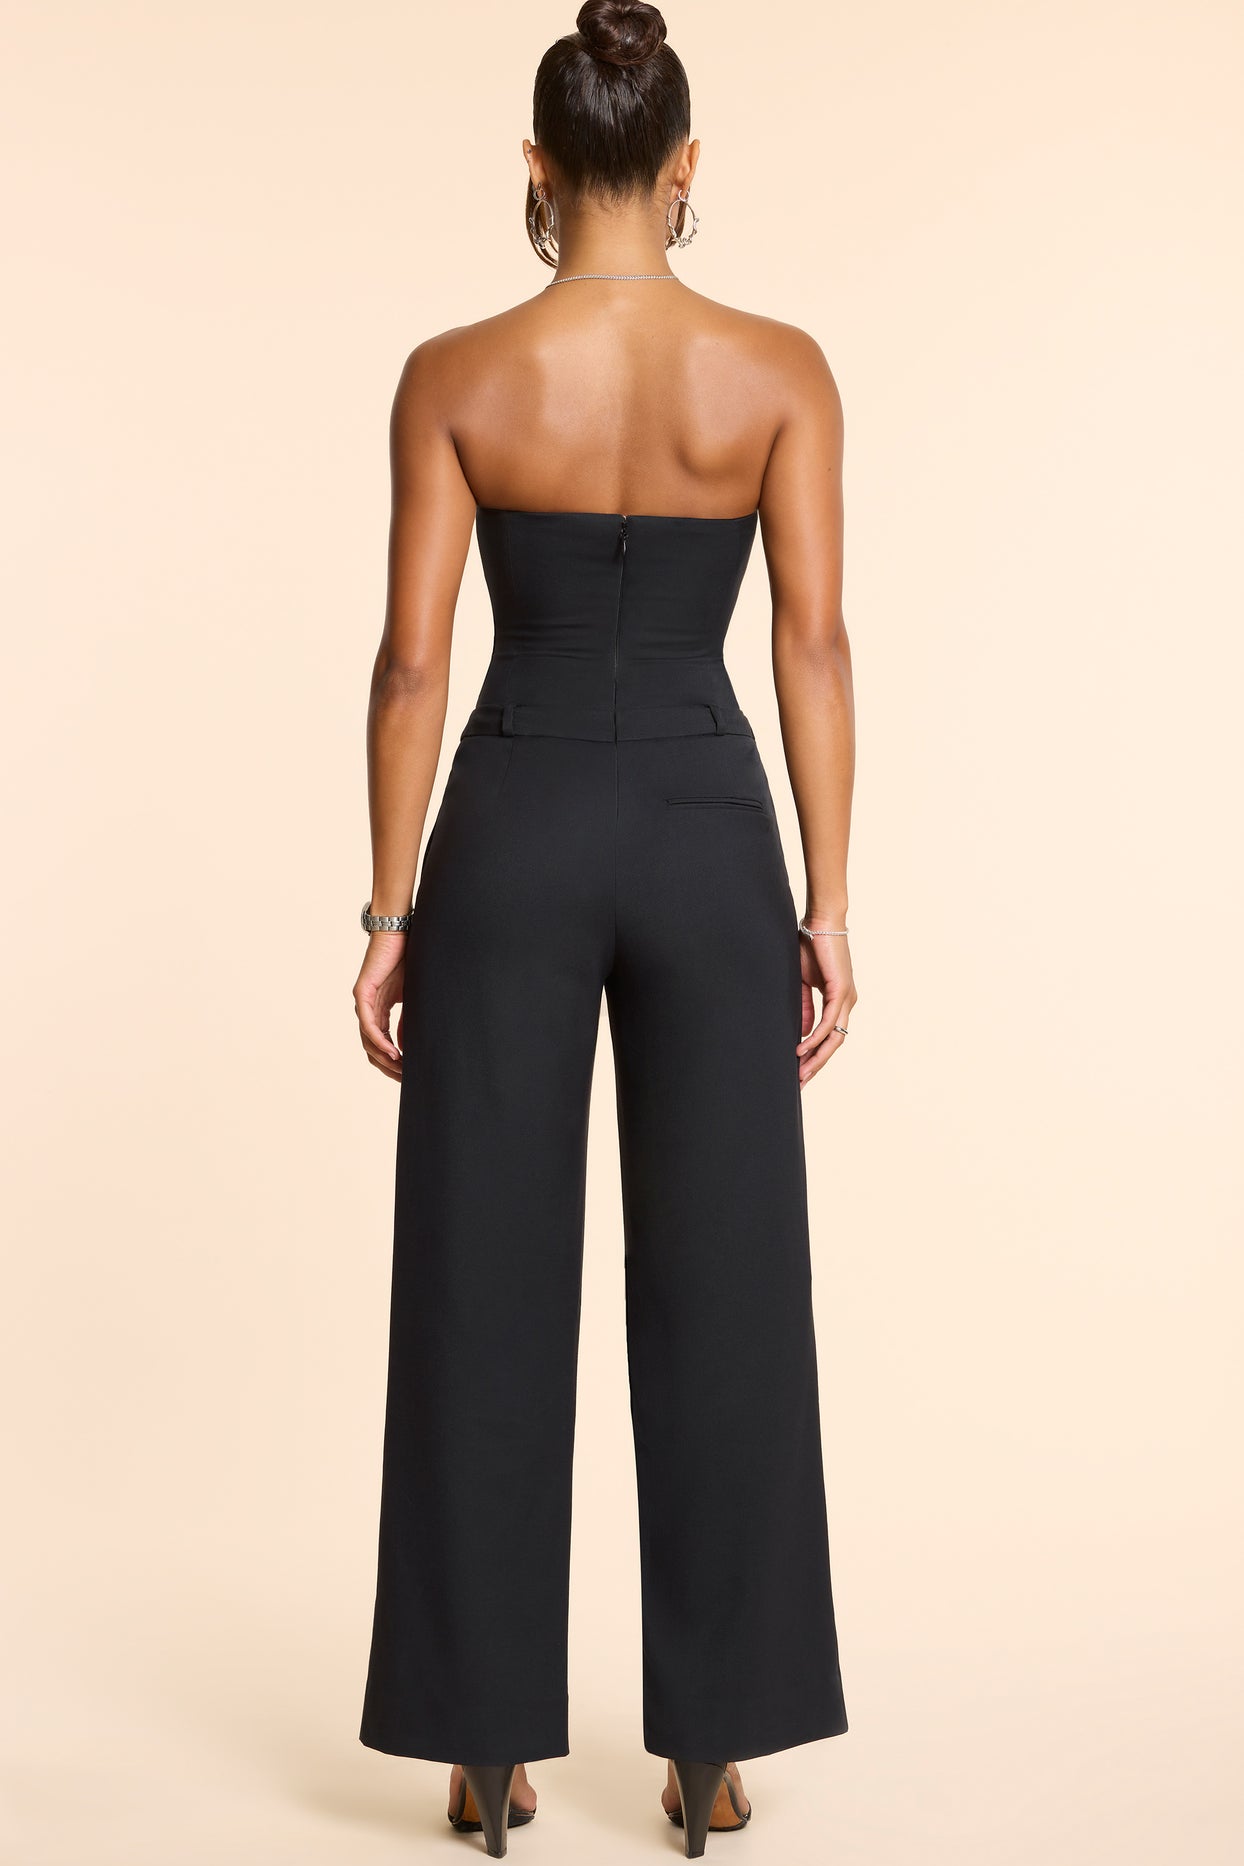 Goldie Petite Woven Wool Bandeau Corset Jumpsuit in Black | Oh Polly